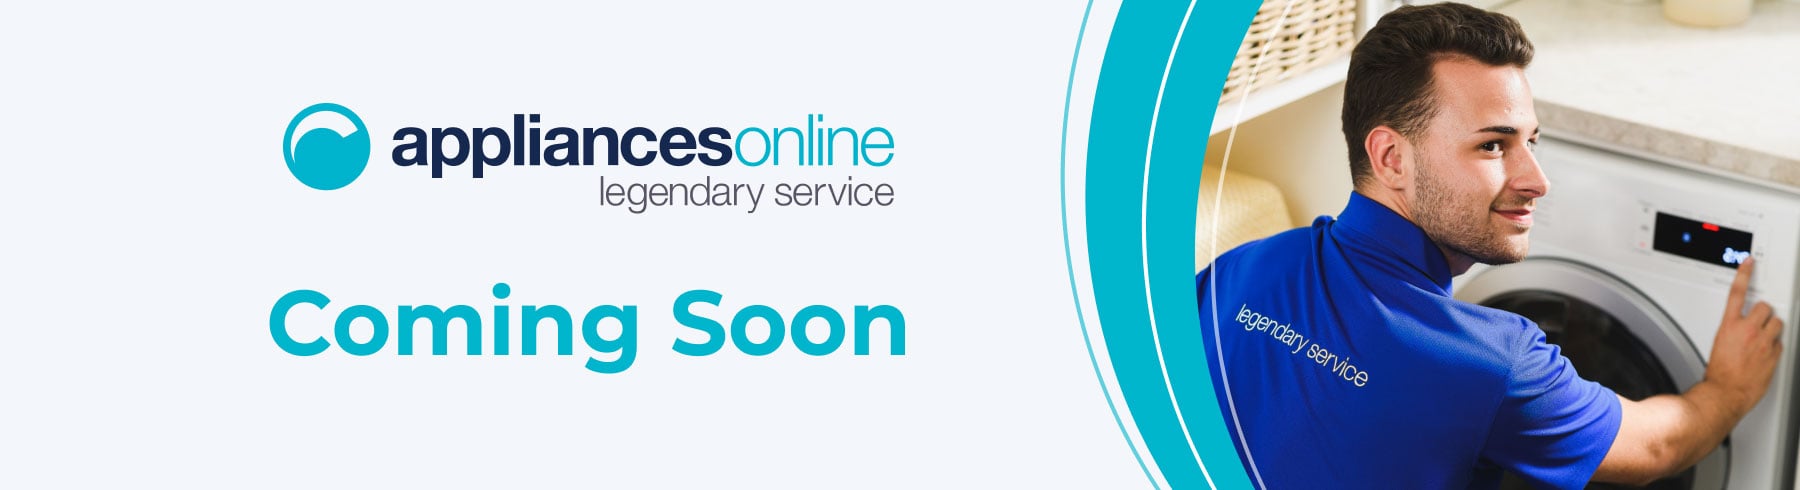 Appliances Online - Coming Soon